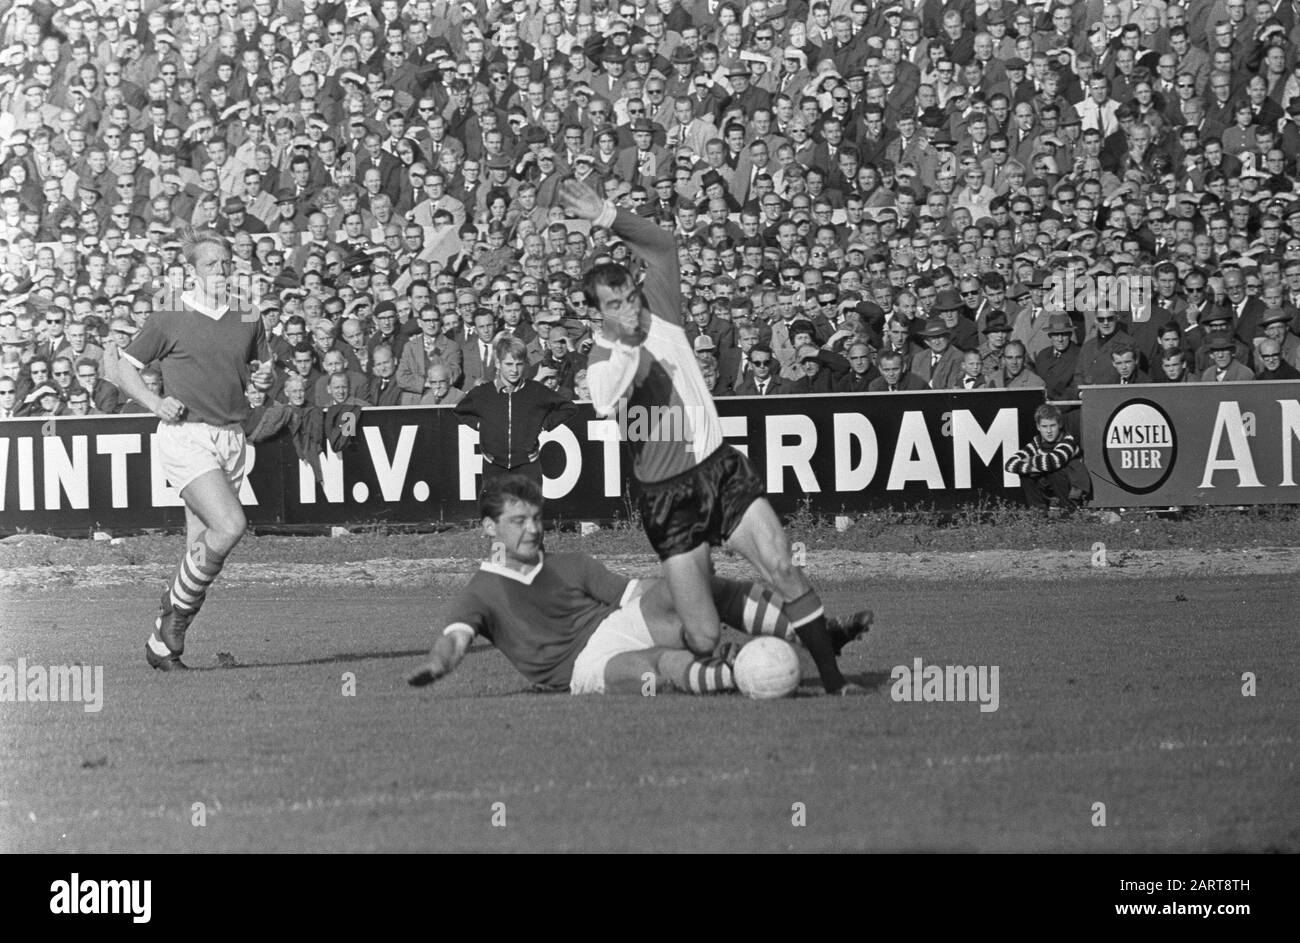 Sparta against Feyenoord 0-3, Coen Moulijn is traced by Laseroms Date: October 18, 1964 Location: Rotterdam Keywords: sport, football Personname: Laseroms, Theo, Moulijn, Coen Institution name: Feyenoord Stock Photo